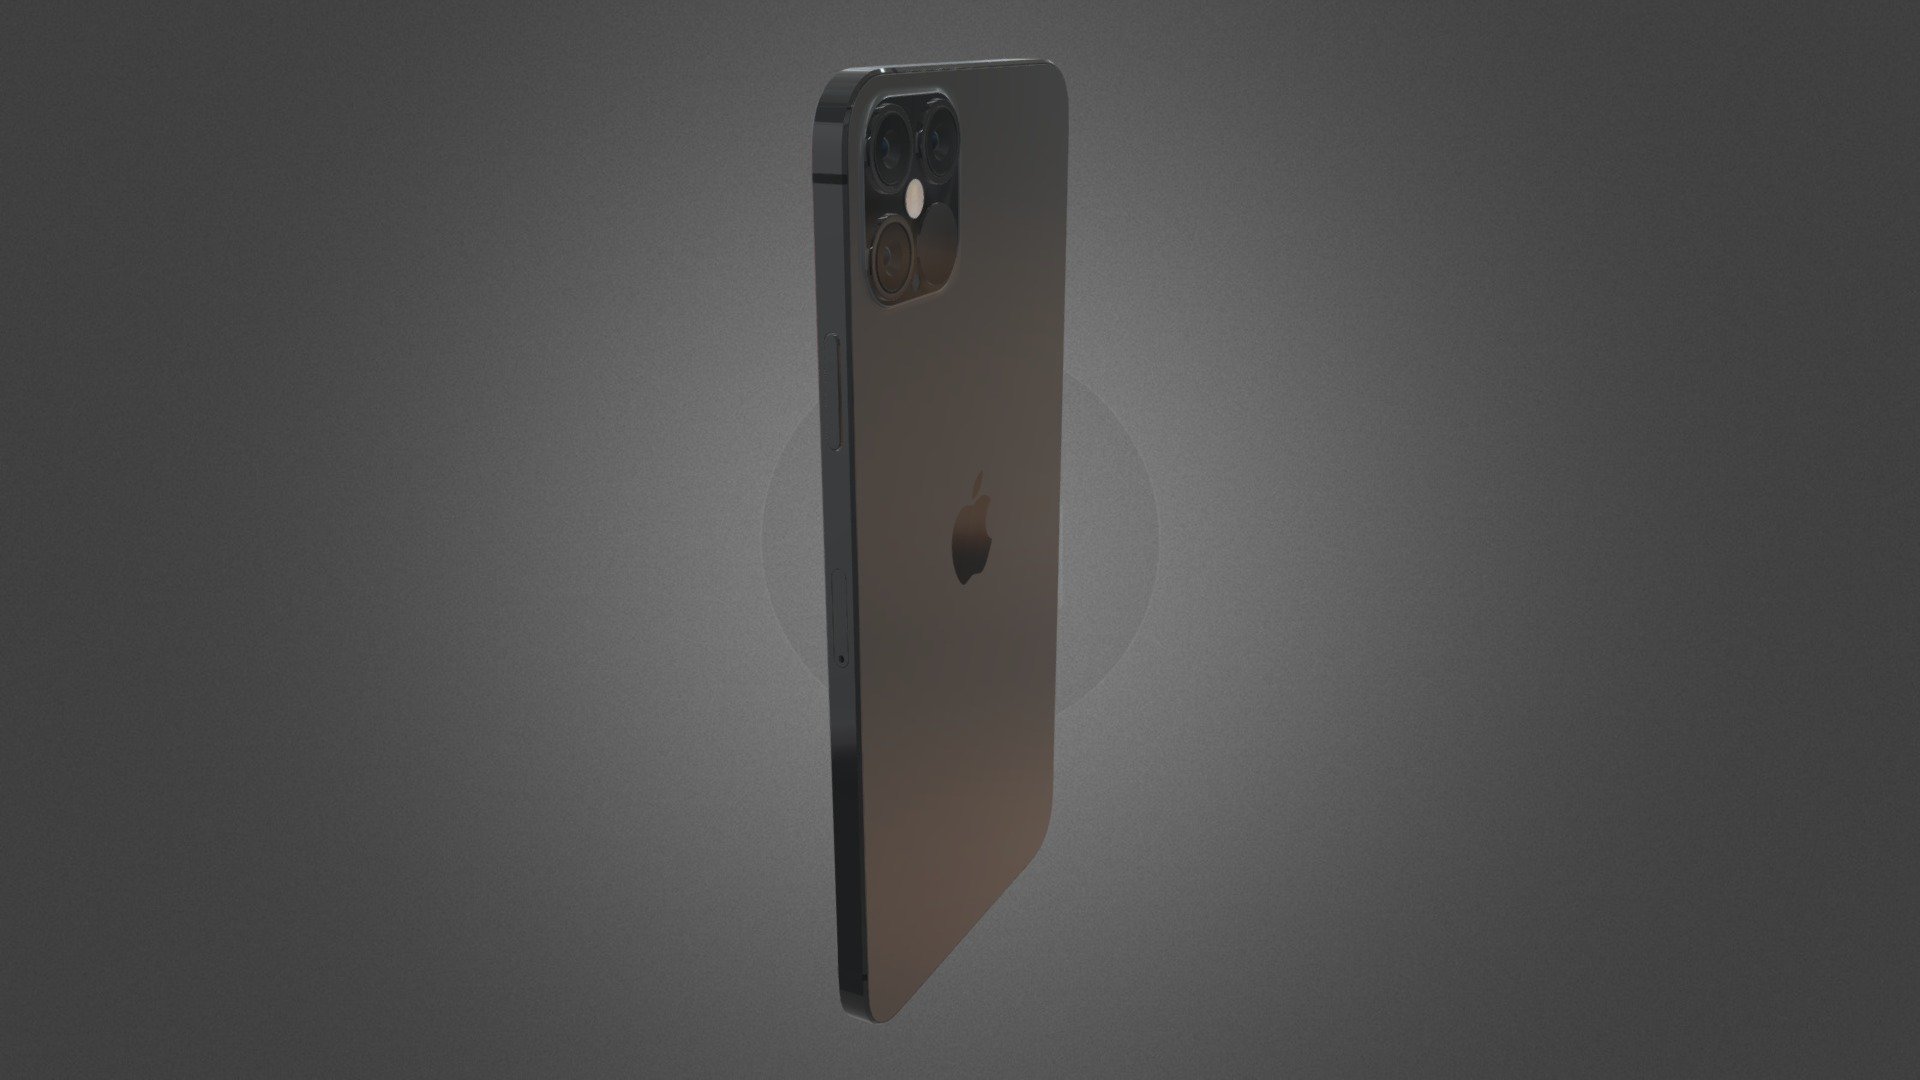 Iphone 12 Pro Max Concept Download Free 3d Model By Aliartist3d Aliartist3d 9719cfe